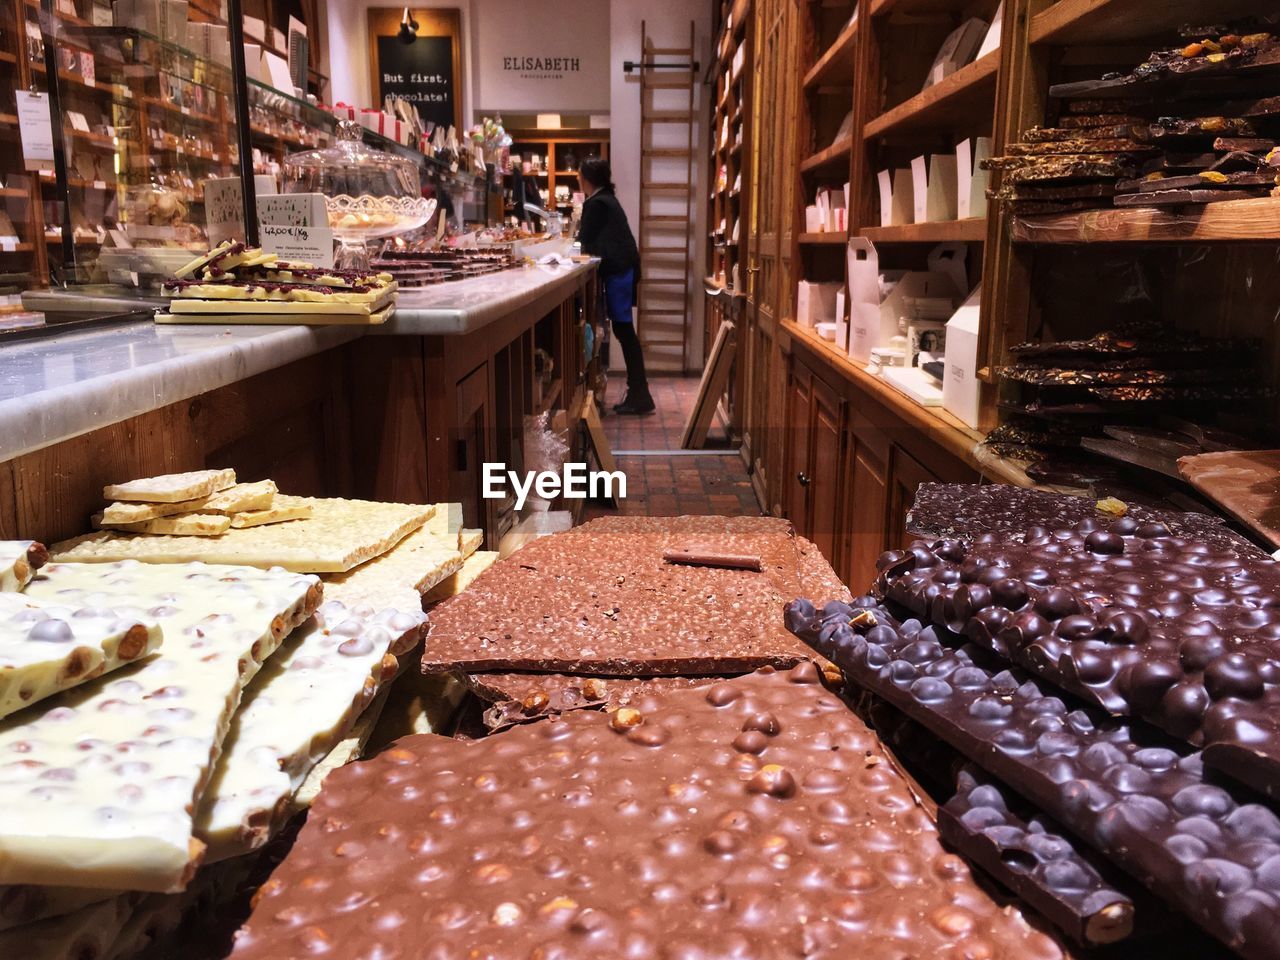 CLOSE-UP OF FOOD IN STORE